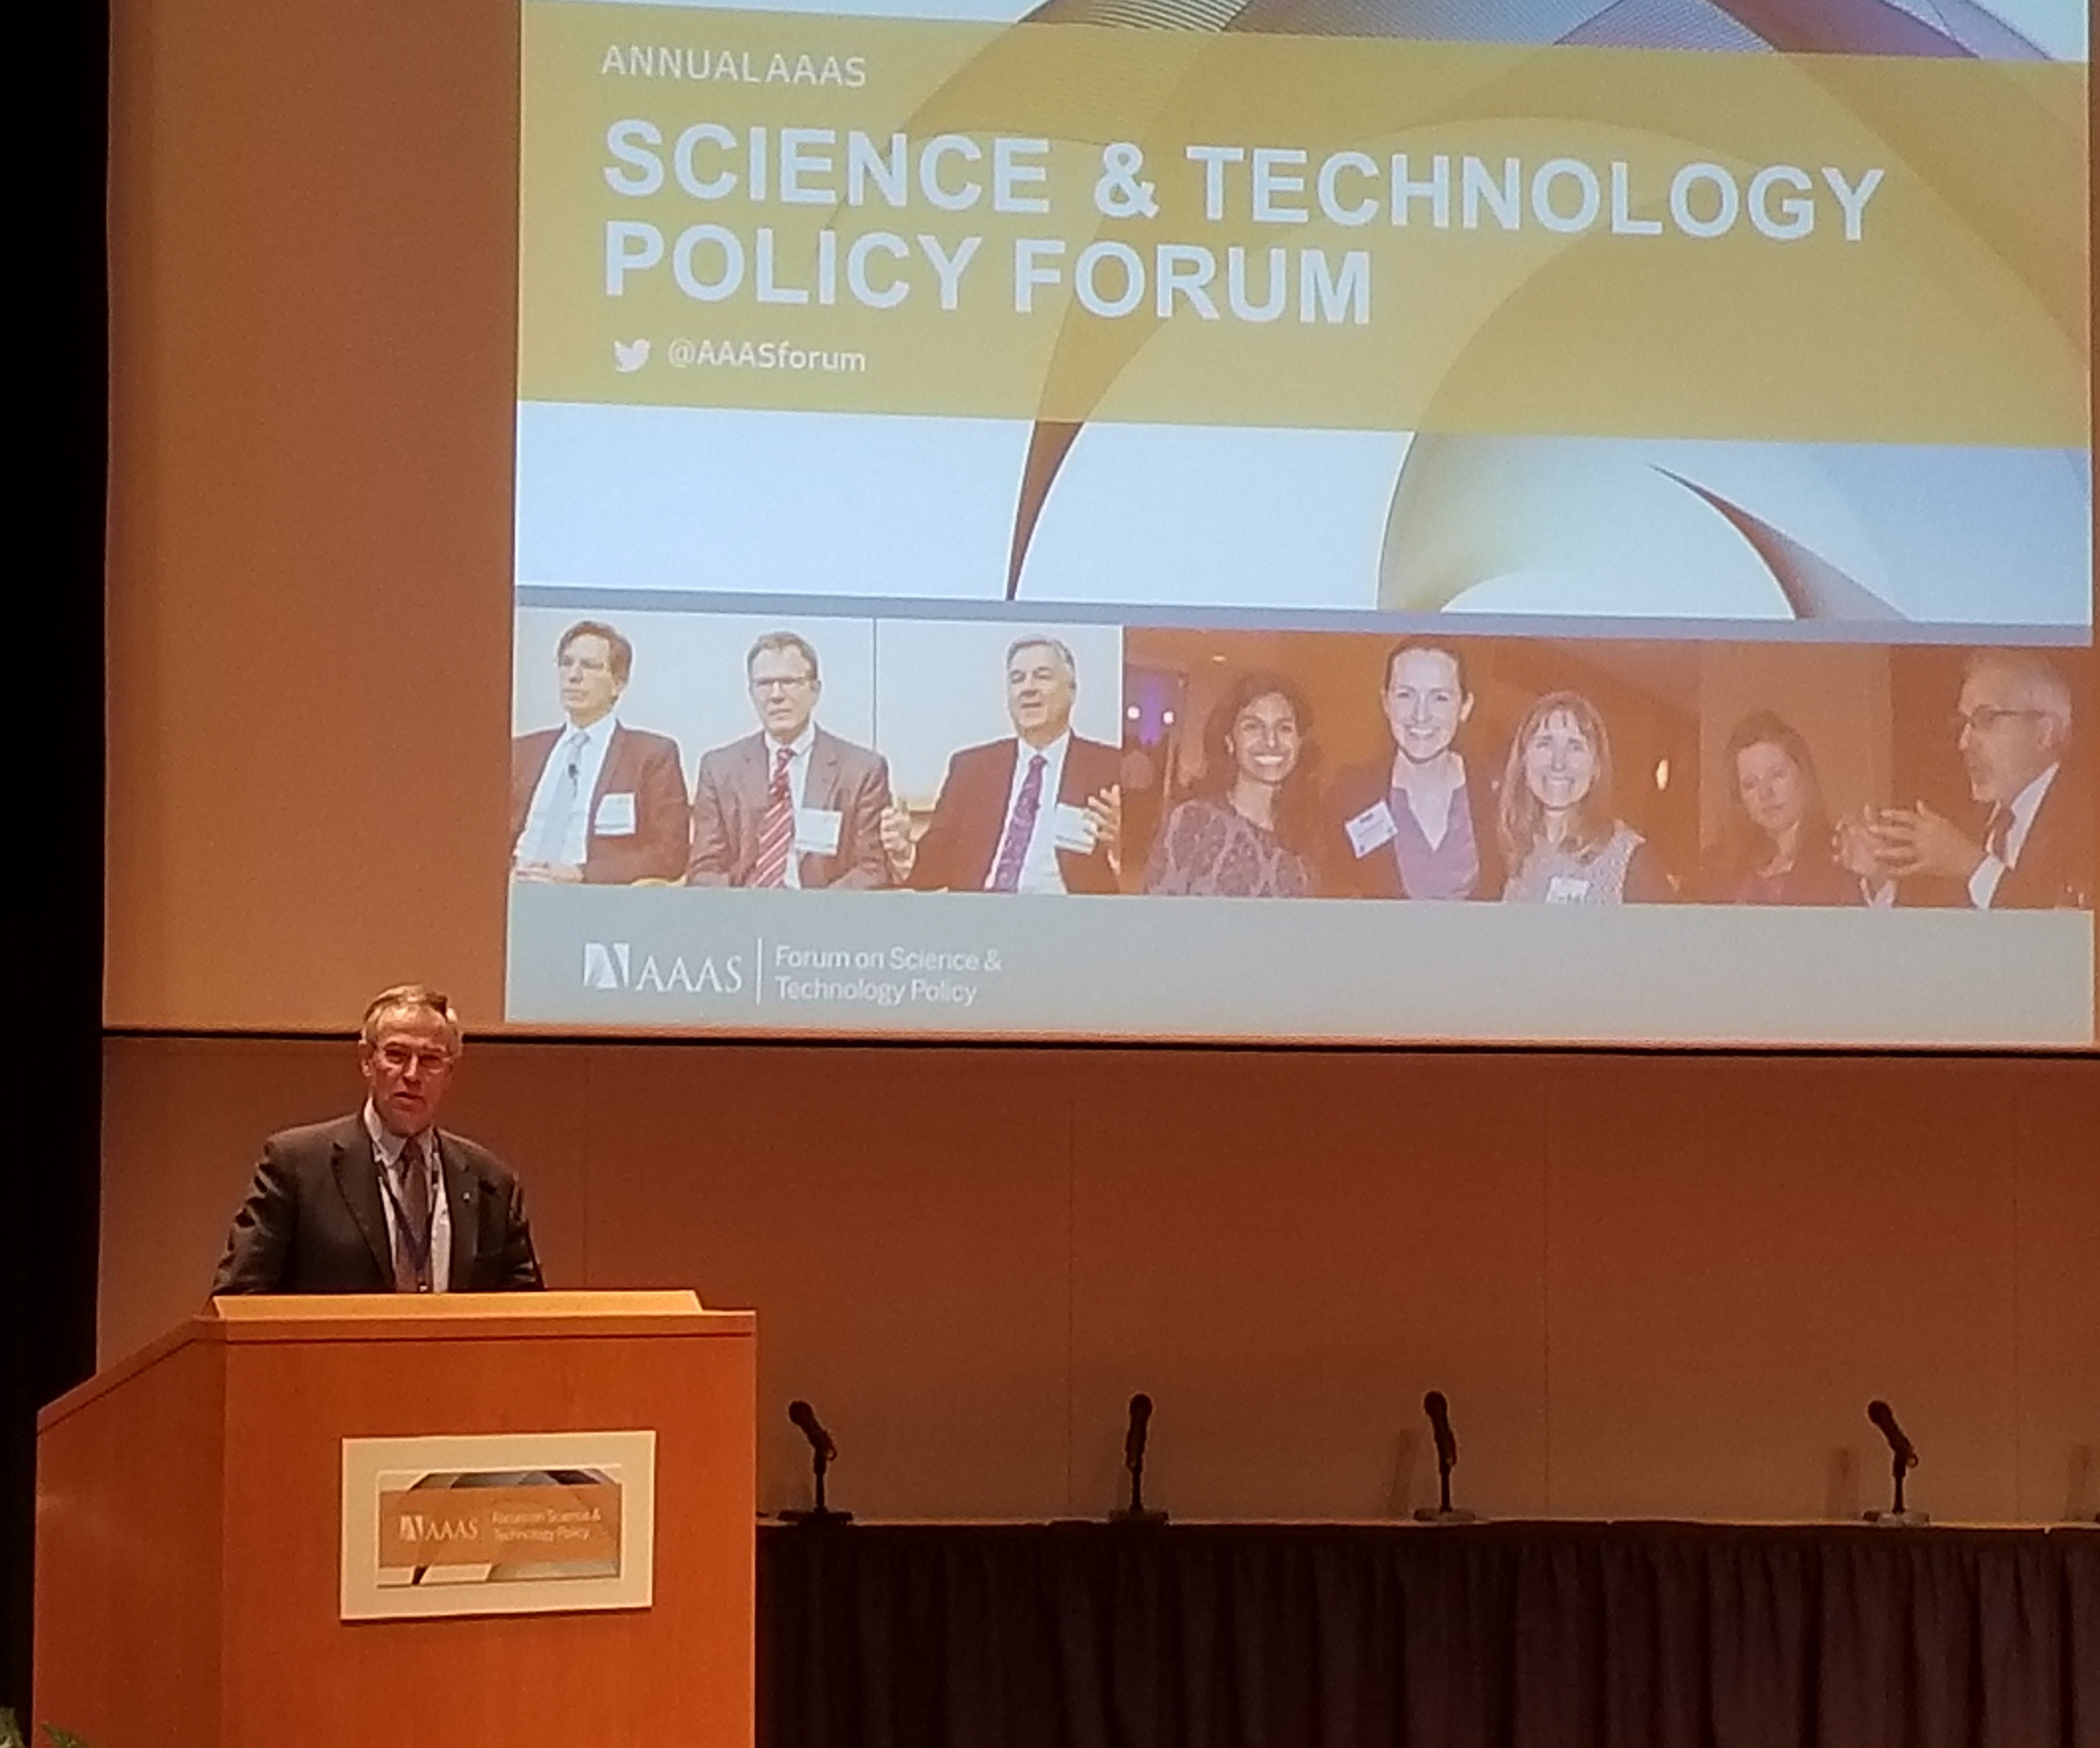 Rush Holt, CEO, AAAS Opens the 43rd Policy Forum